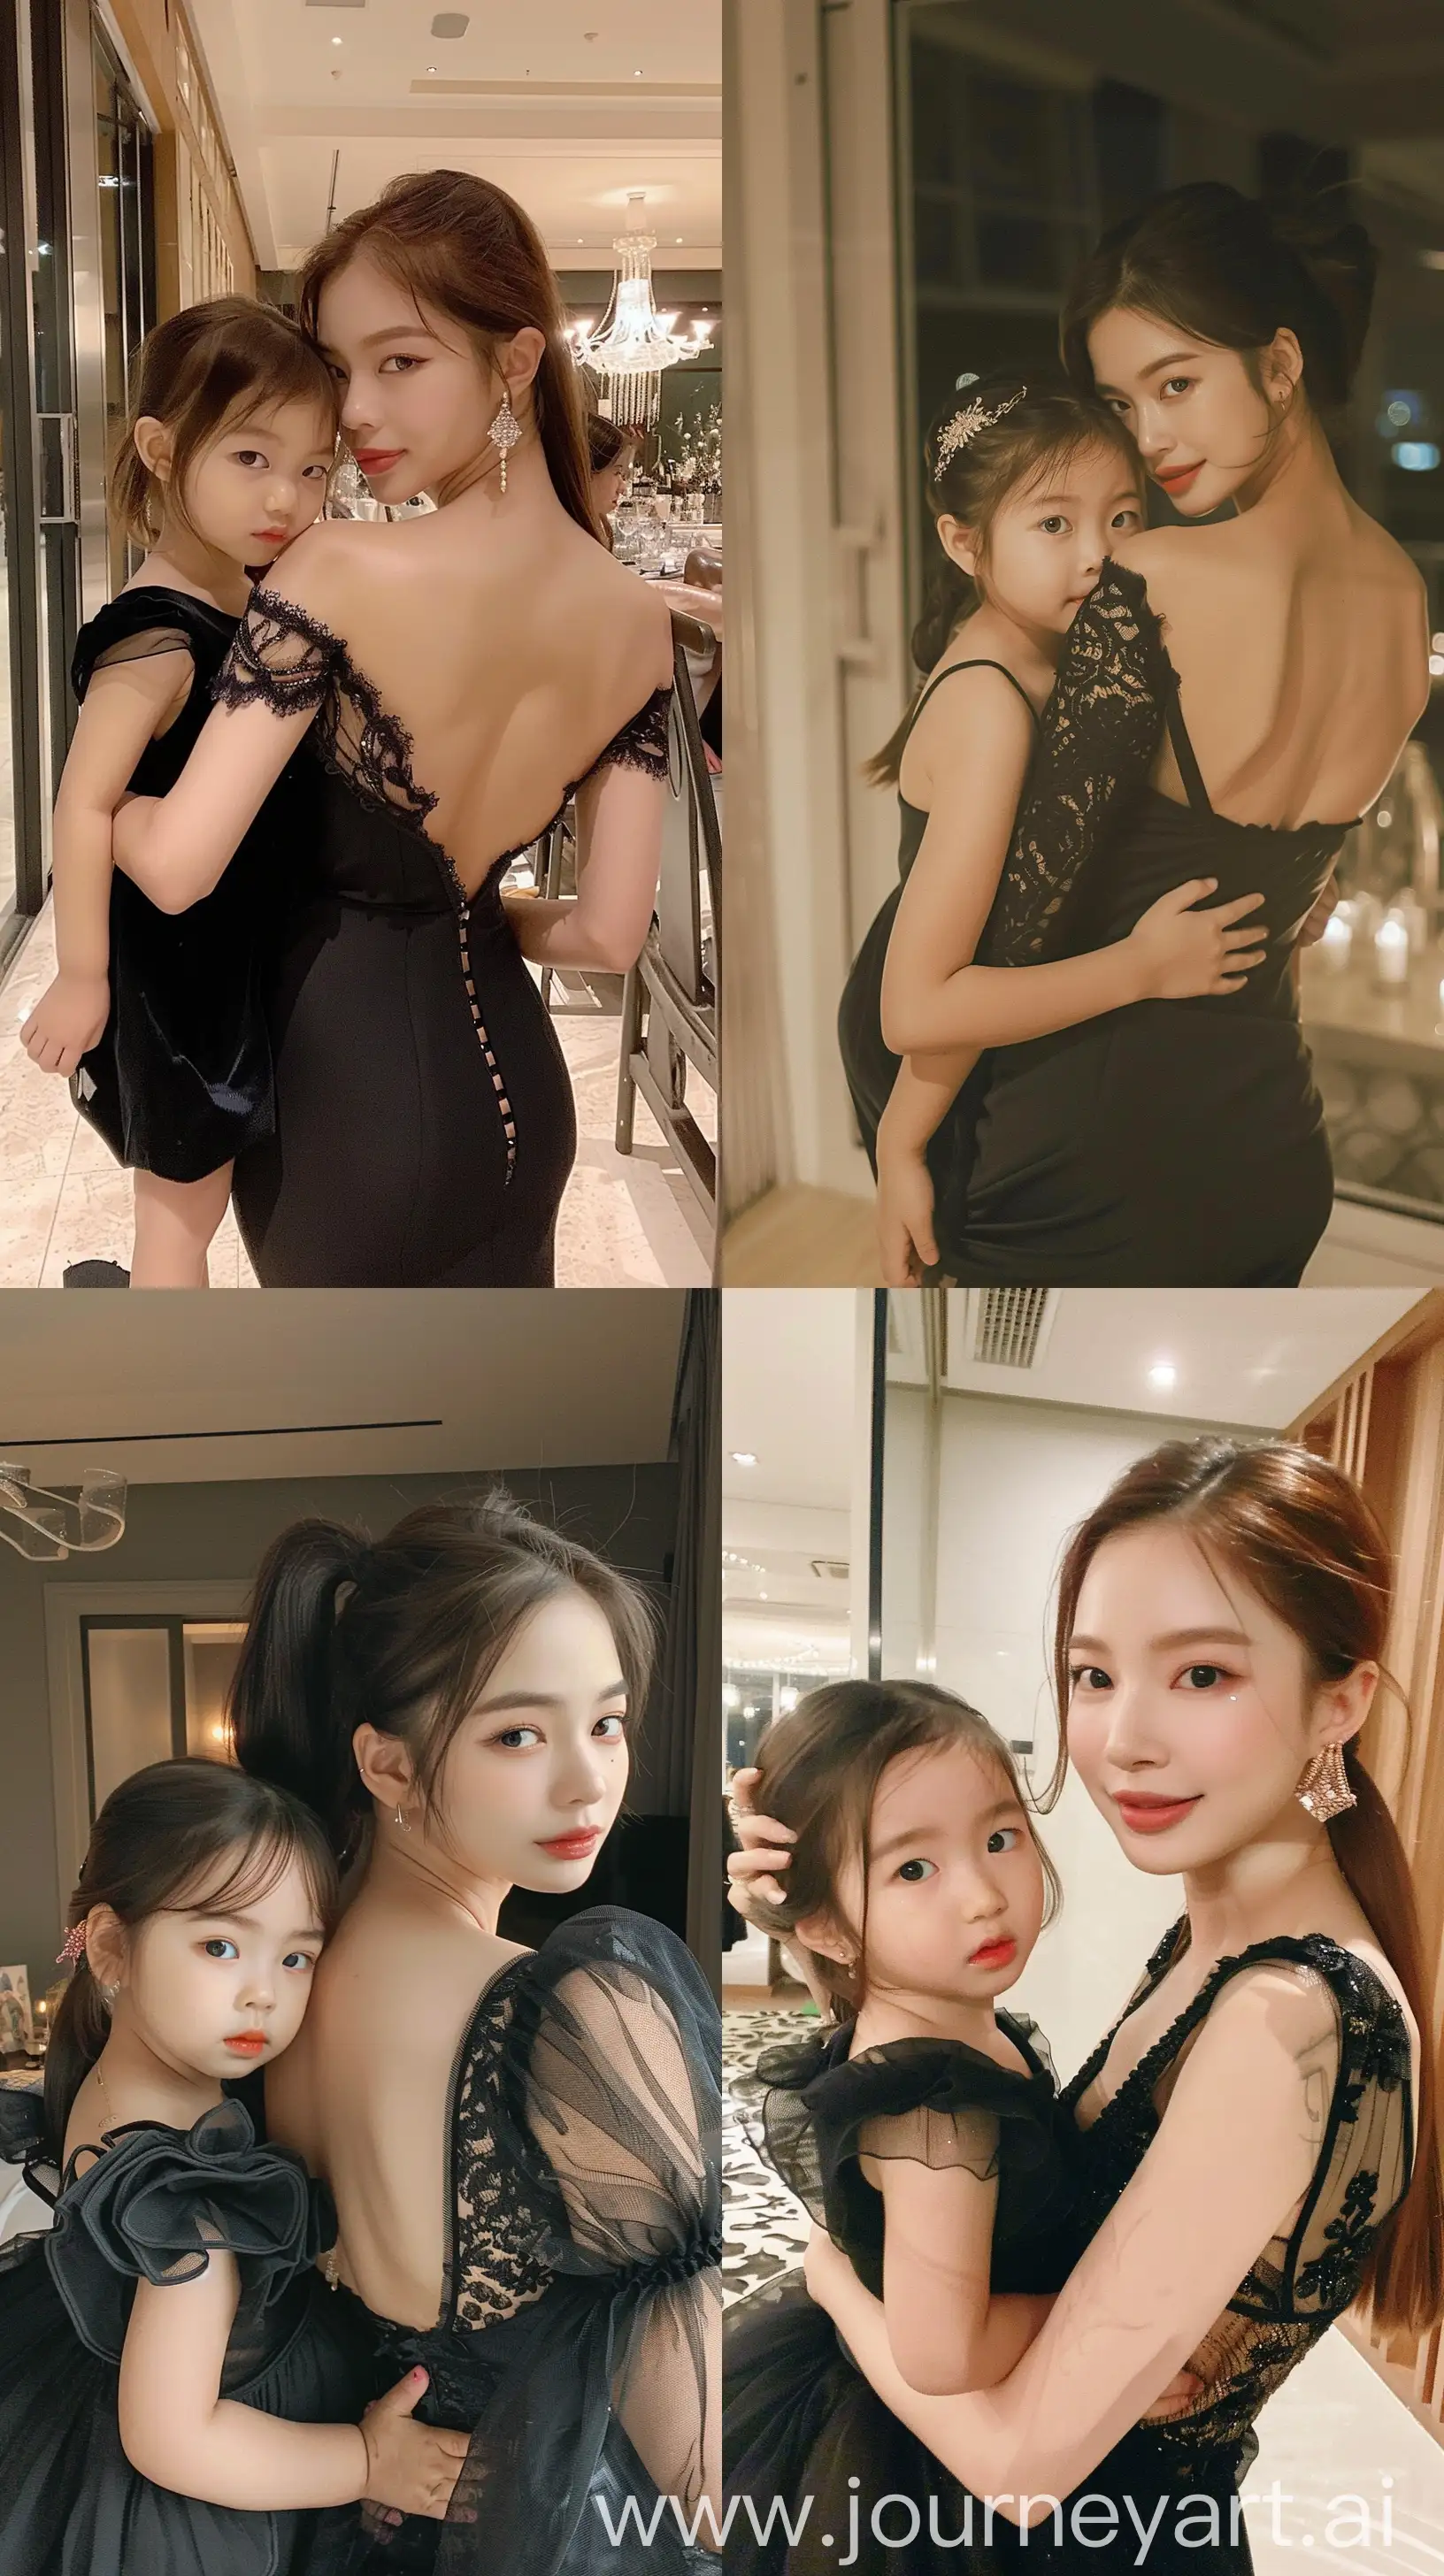 blackpink's jennie selfie with 2 years old girl, facial feature look a like blackpink's jennie, aestethic selfie, night times, aestethic make up, wearing black elegant dress, back body,hotly young mom --ar 9:16